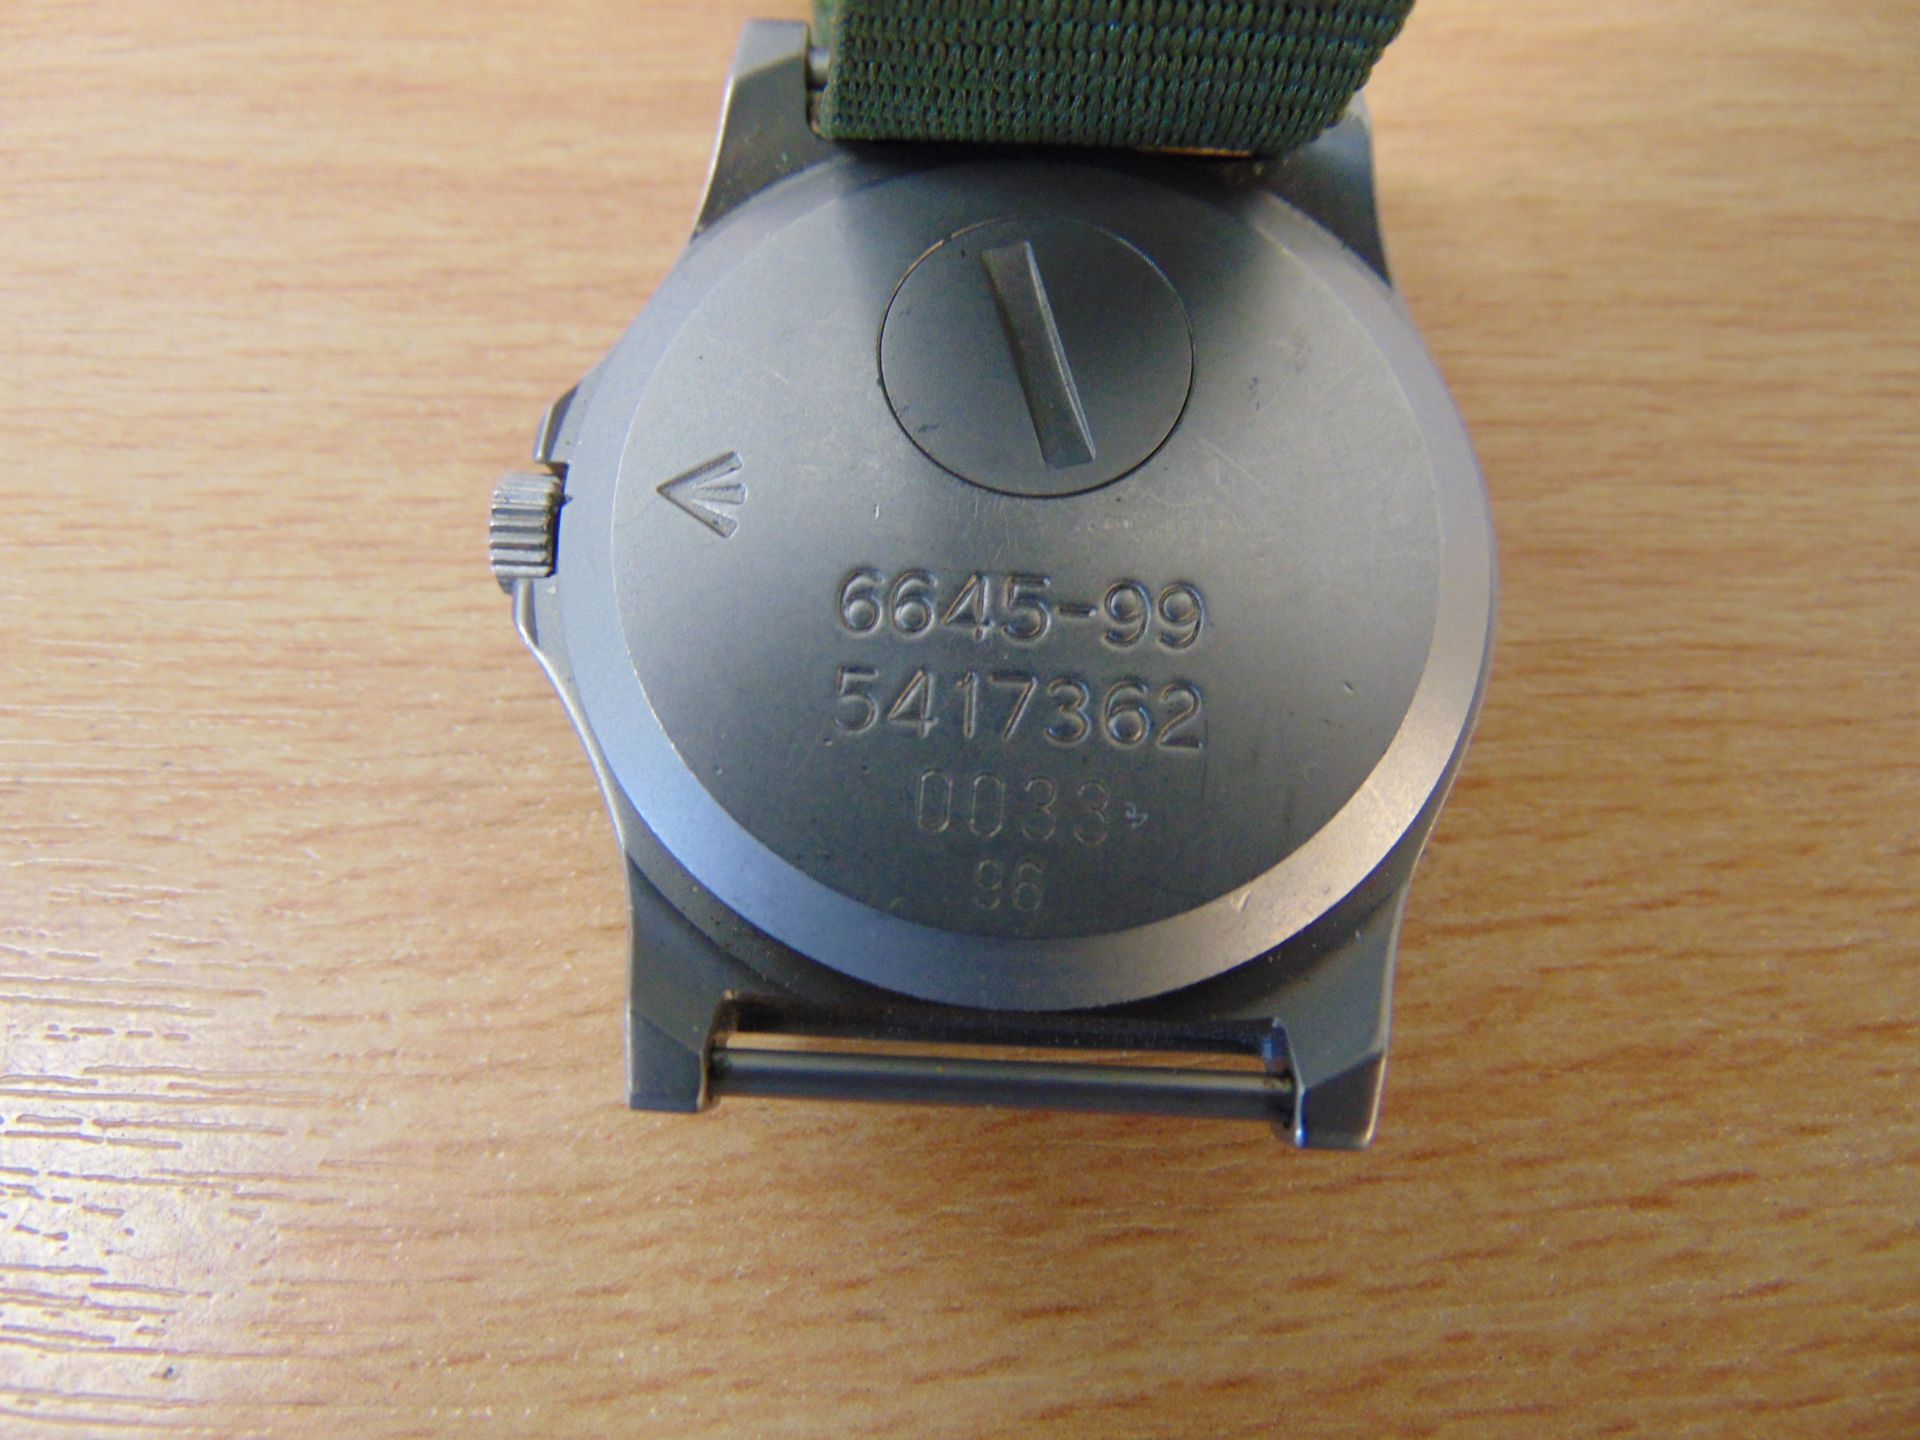 Very Rare CWC British Service Watch Serial No 0033 with Date Adjust Nato Marks Date 1996 - Image 3 of 4